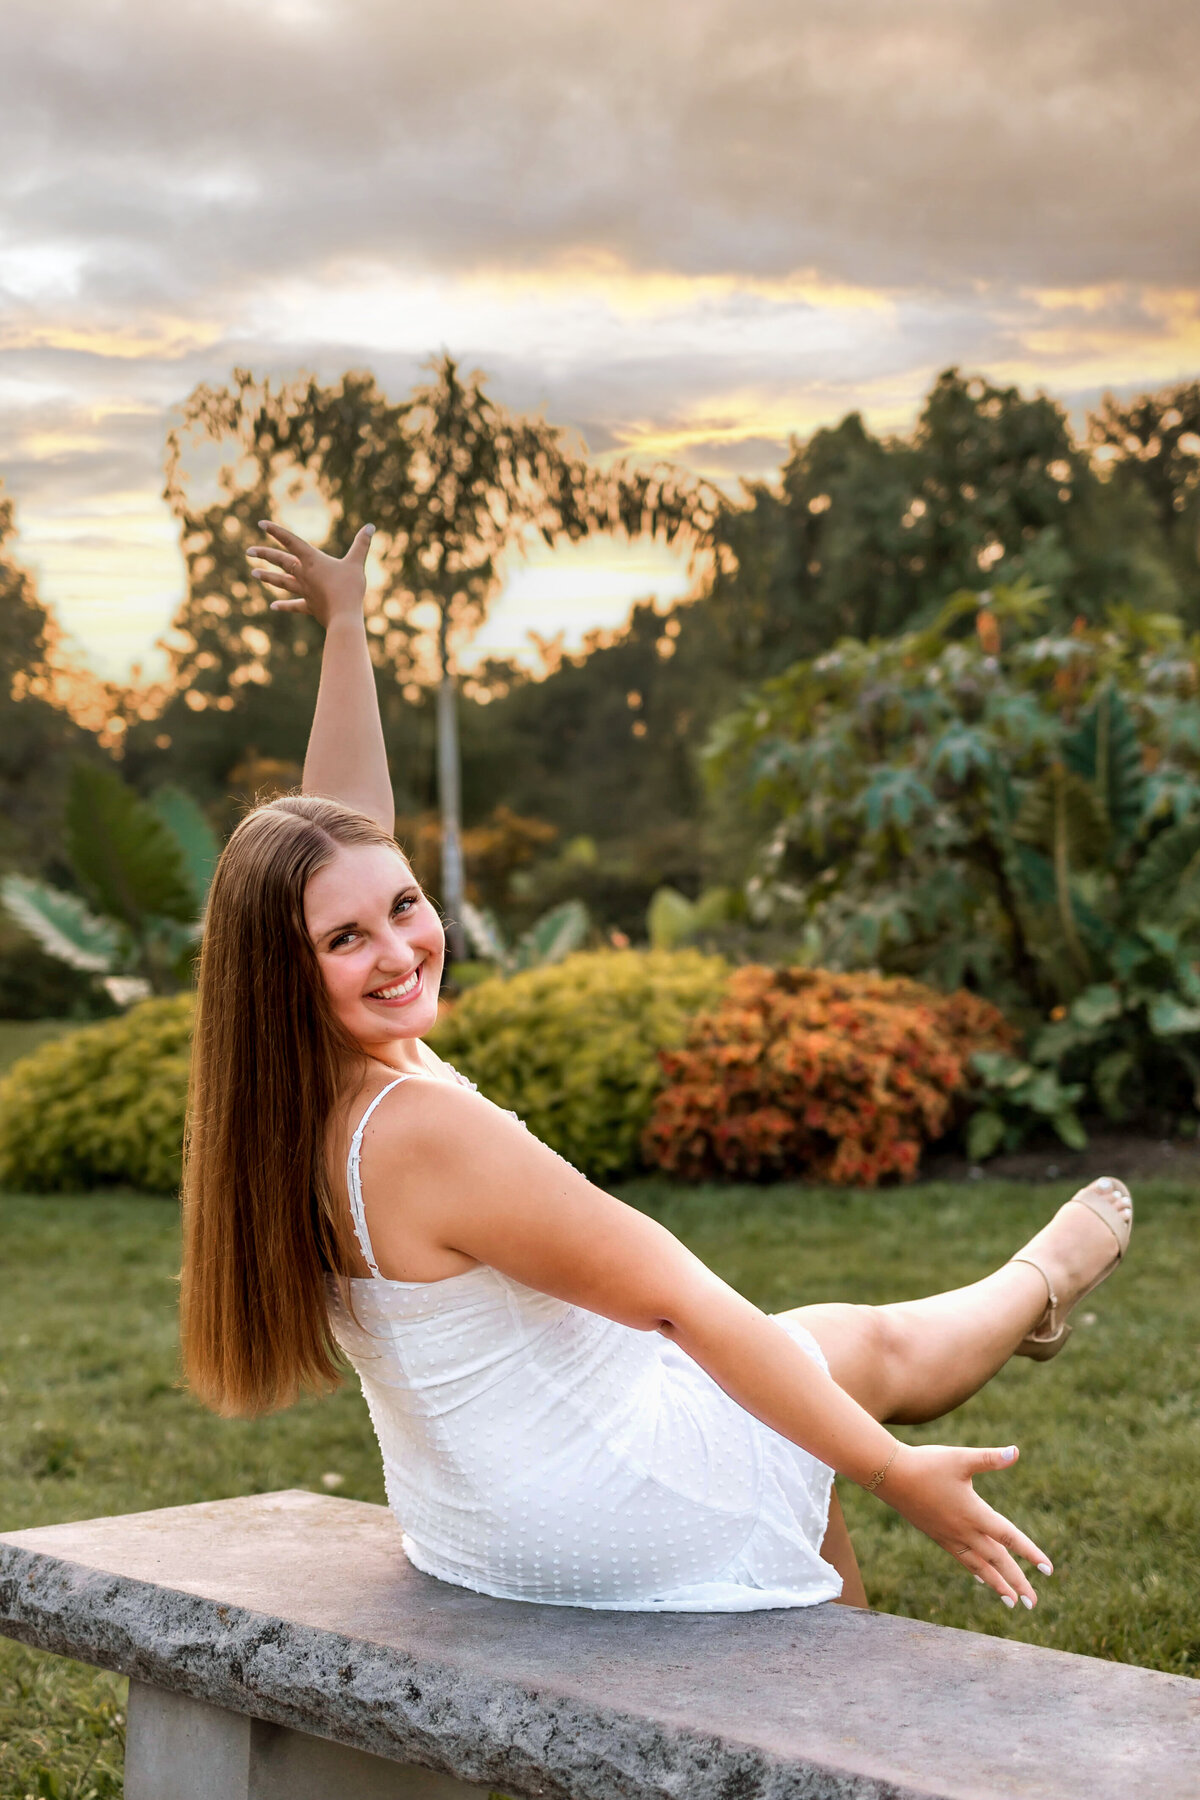 A brunette girl is having fun leaned back on a bench in tower grove park with her arms held open and her foot kicked up while she is looking back over her shoulder at her senior portrait photographer.